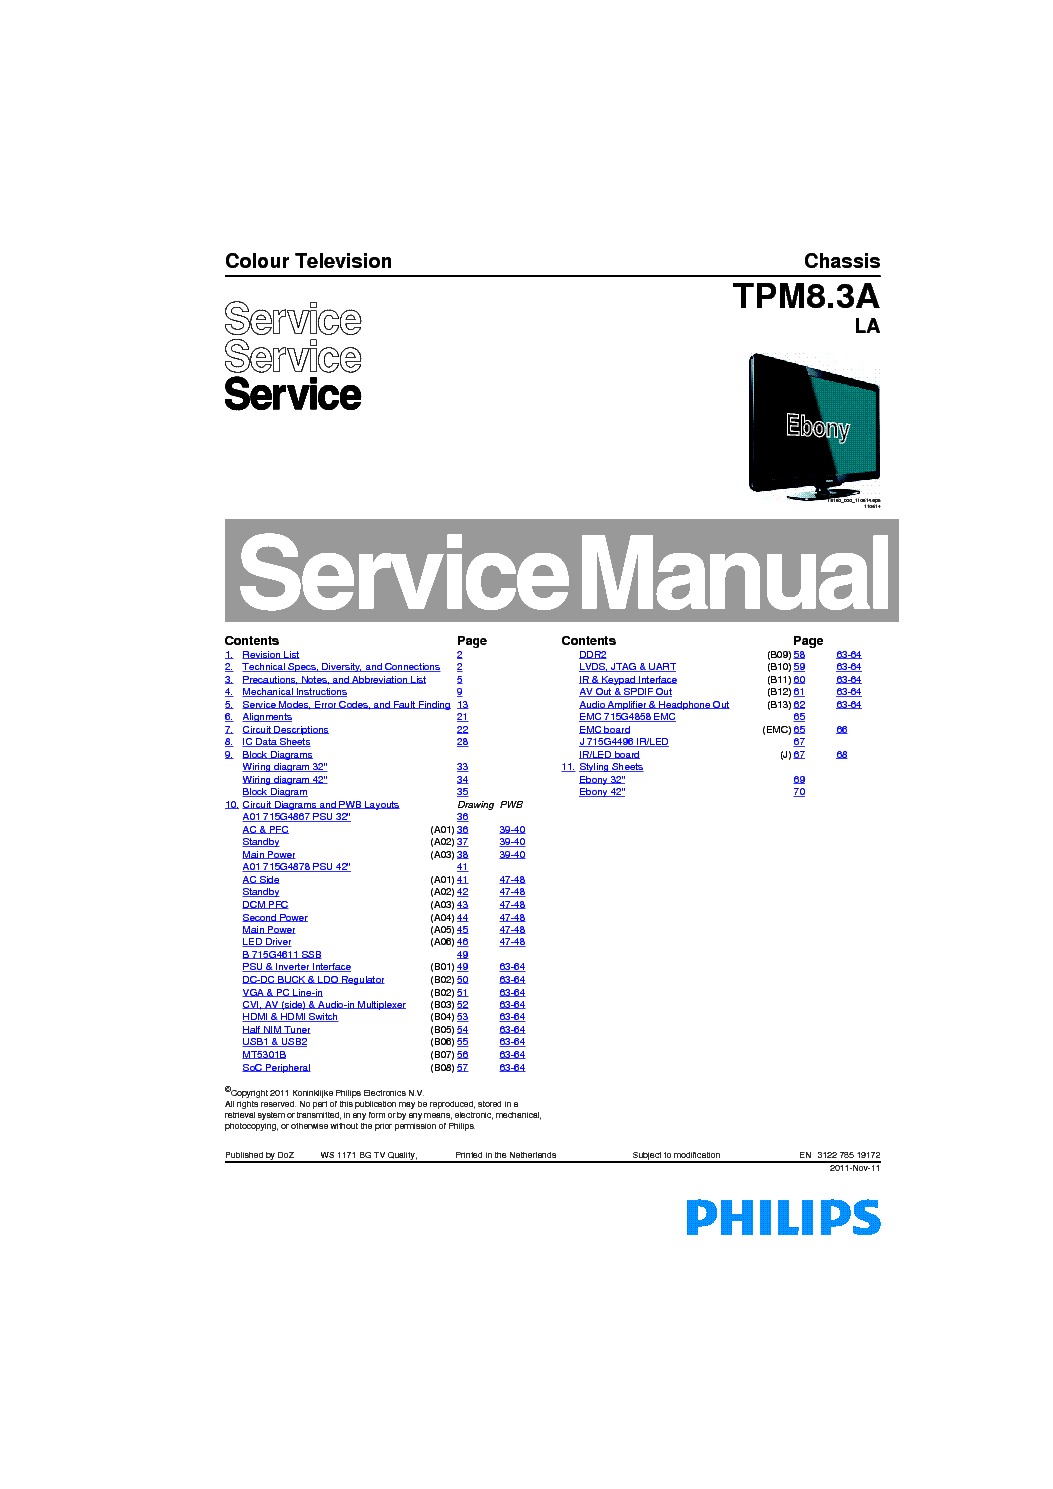 PHILIPS CHASSIS TPM8.3A LA service manual (1st page)